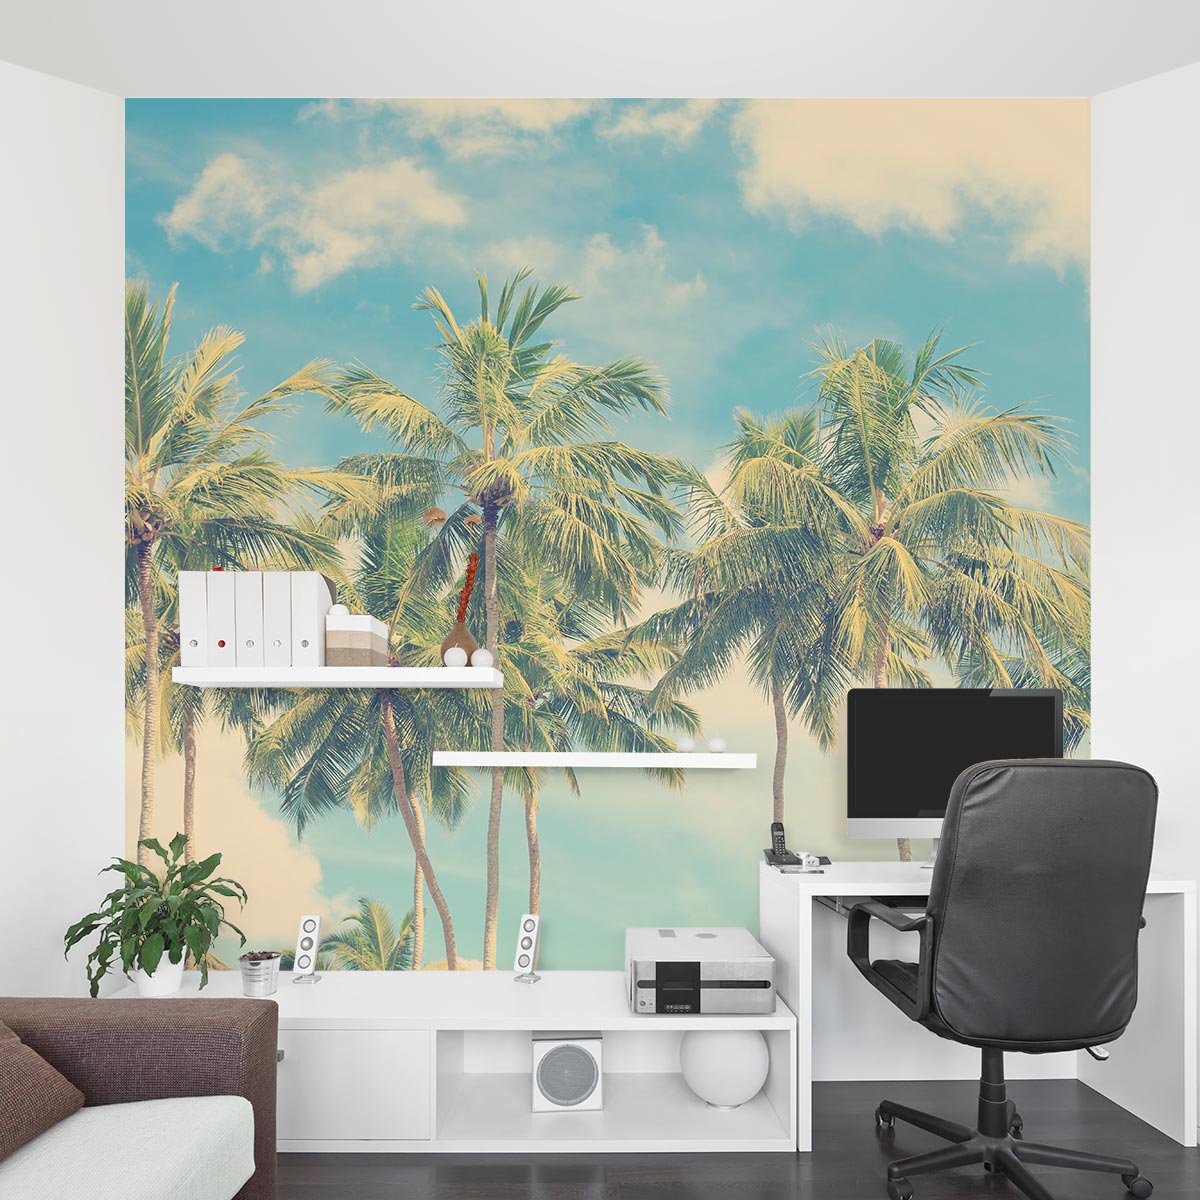 Vintage Palm Tree Wall Mural | Vintage Palm Wall Decal1200 x 1200